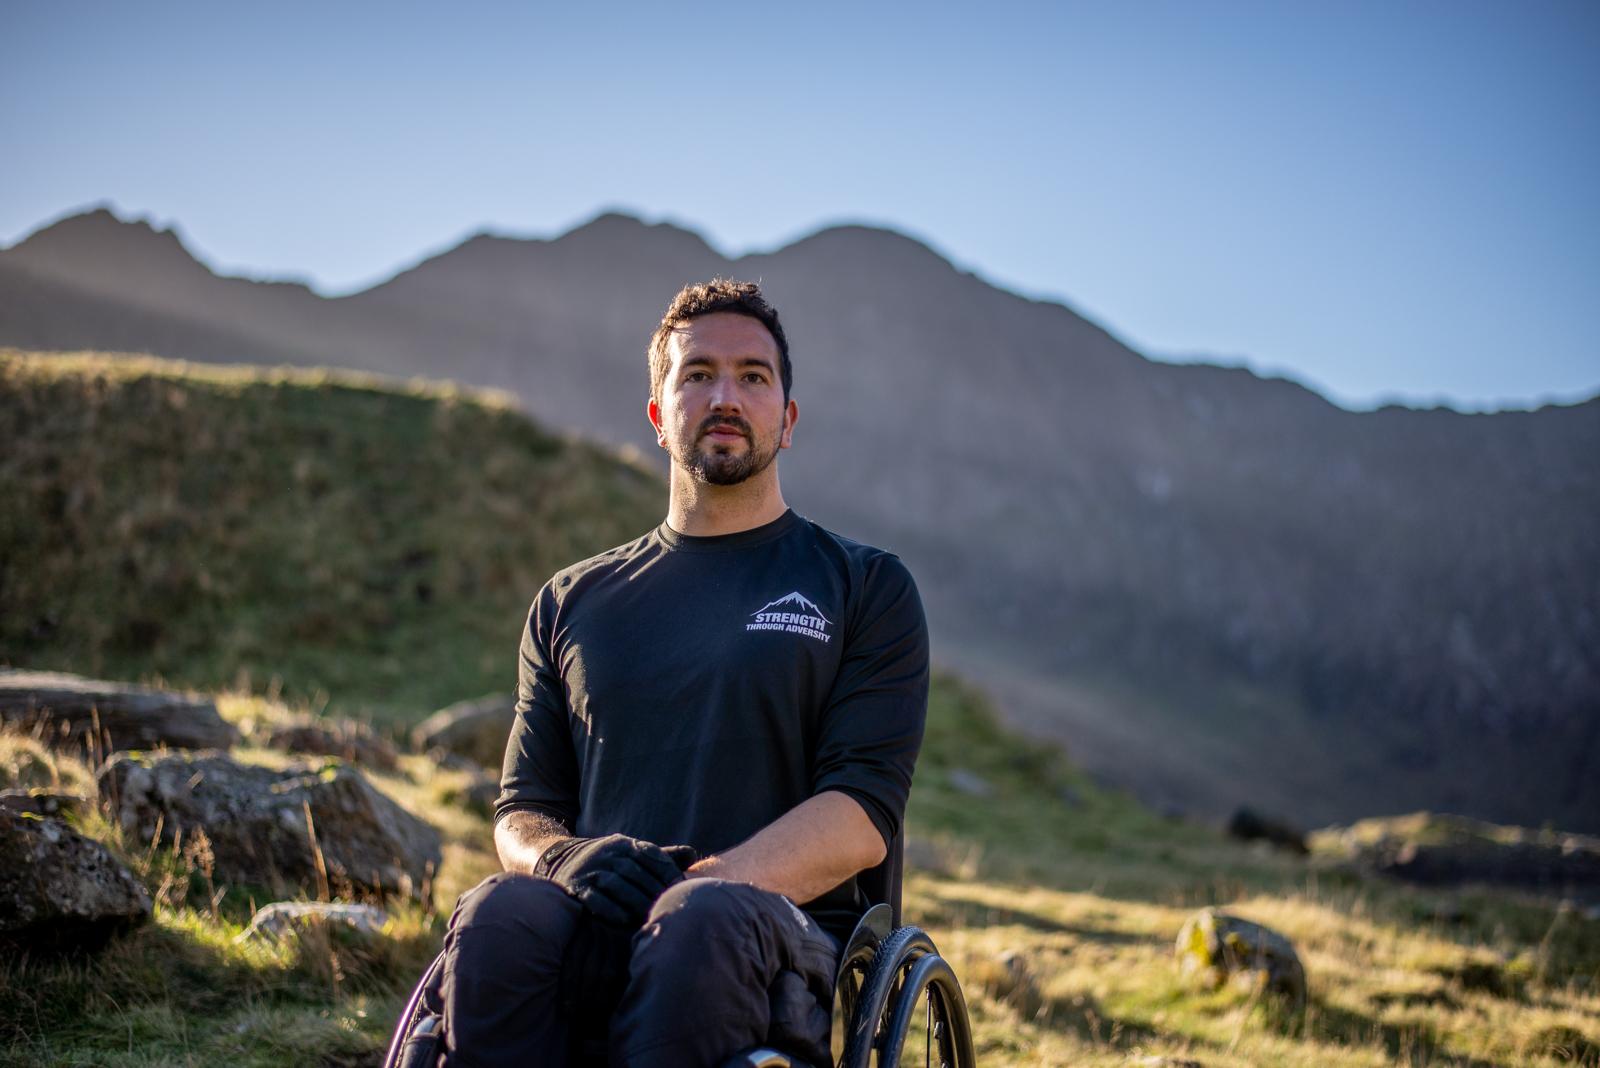 Darren Edwards has achieved remarkable feats of endurance, from kayaking Land's End to John o' Groats to skiing the largest ice cap in Europe. Photo: Darren Edwards